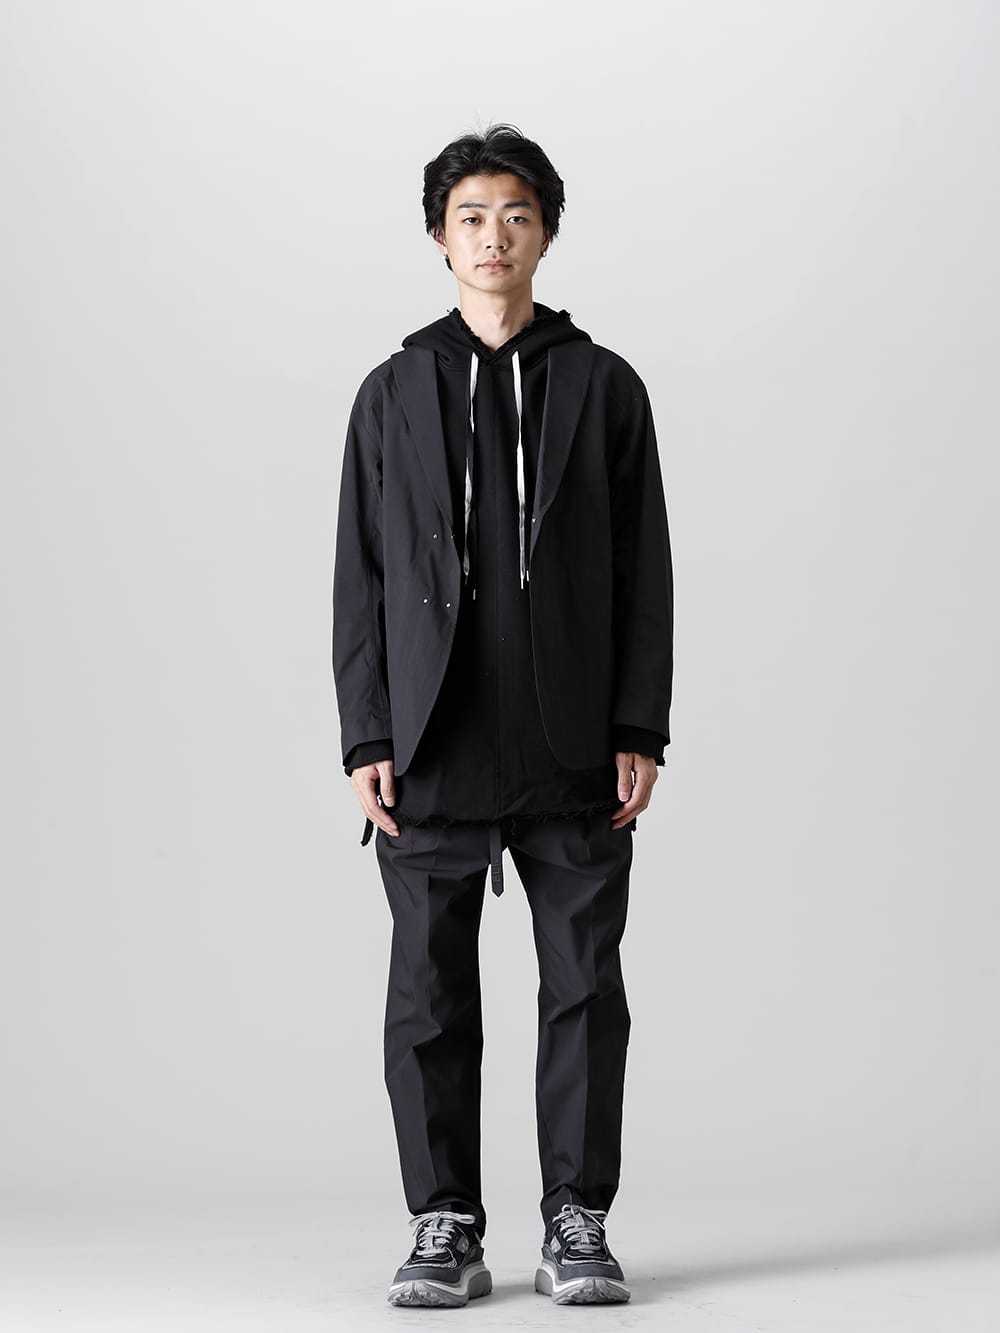 White Mountaineering テックウェザーセットアップ ラフスタイル ...